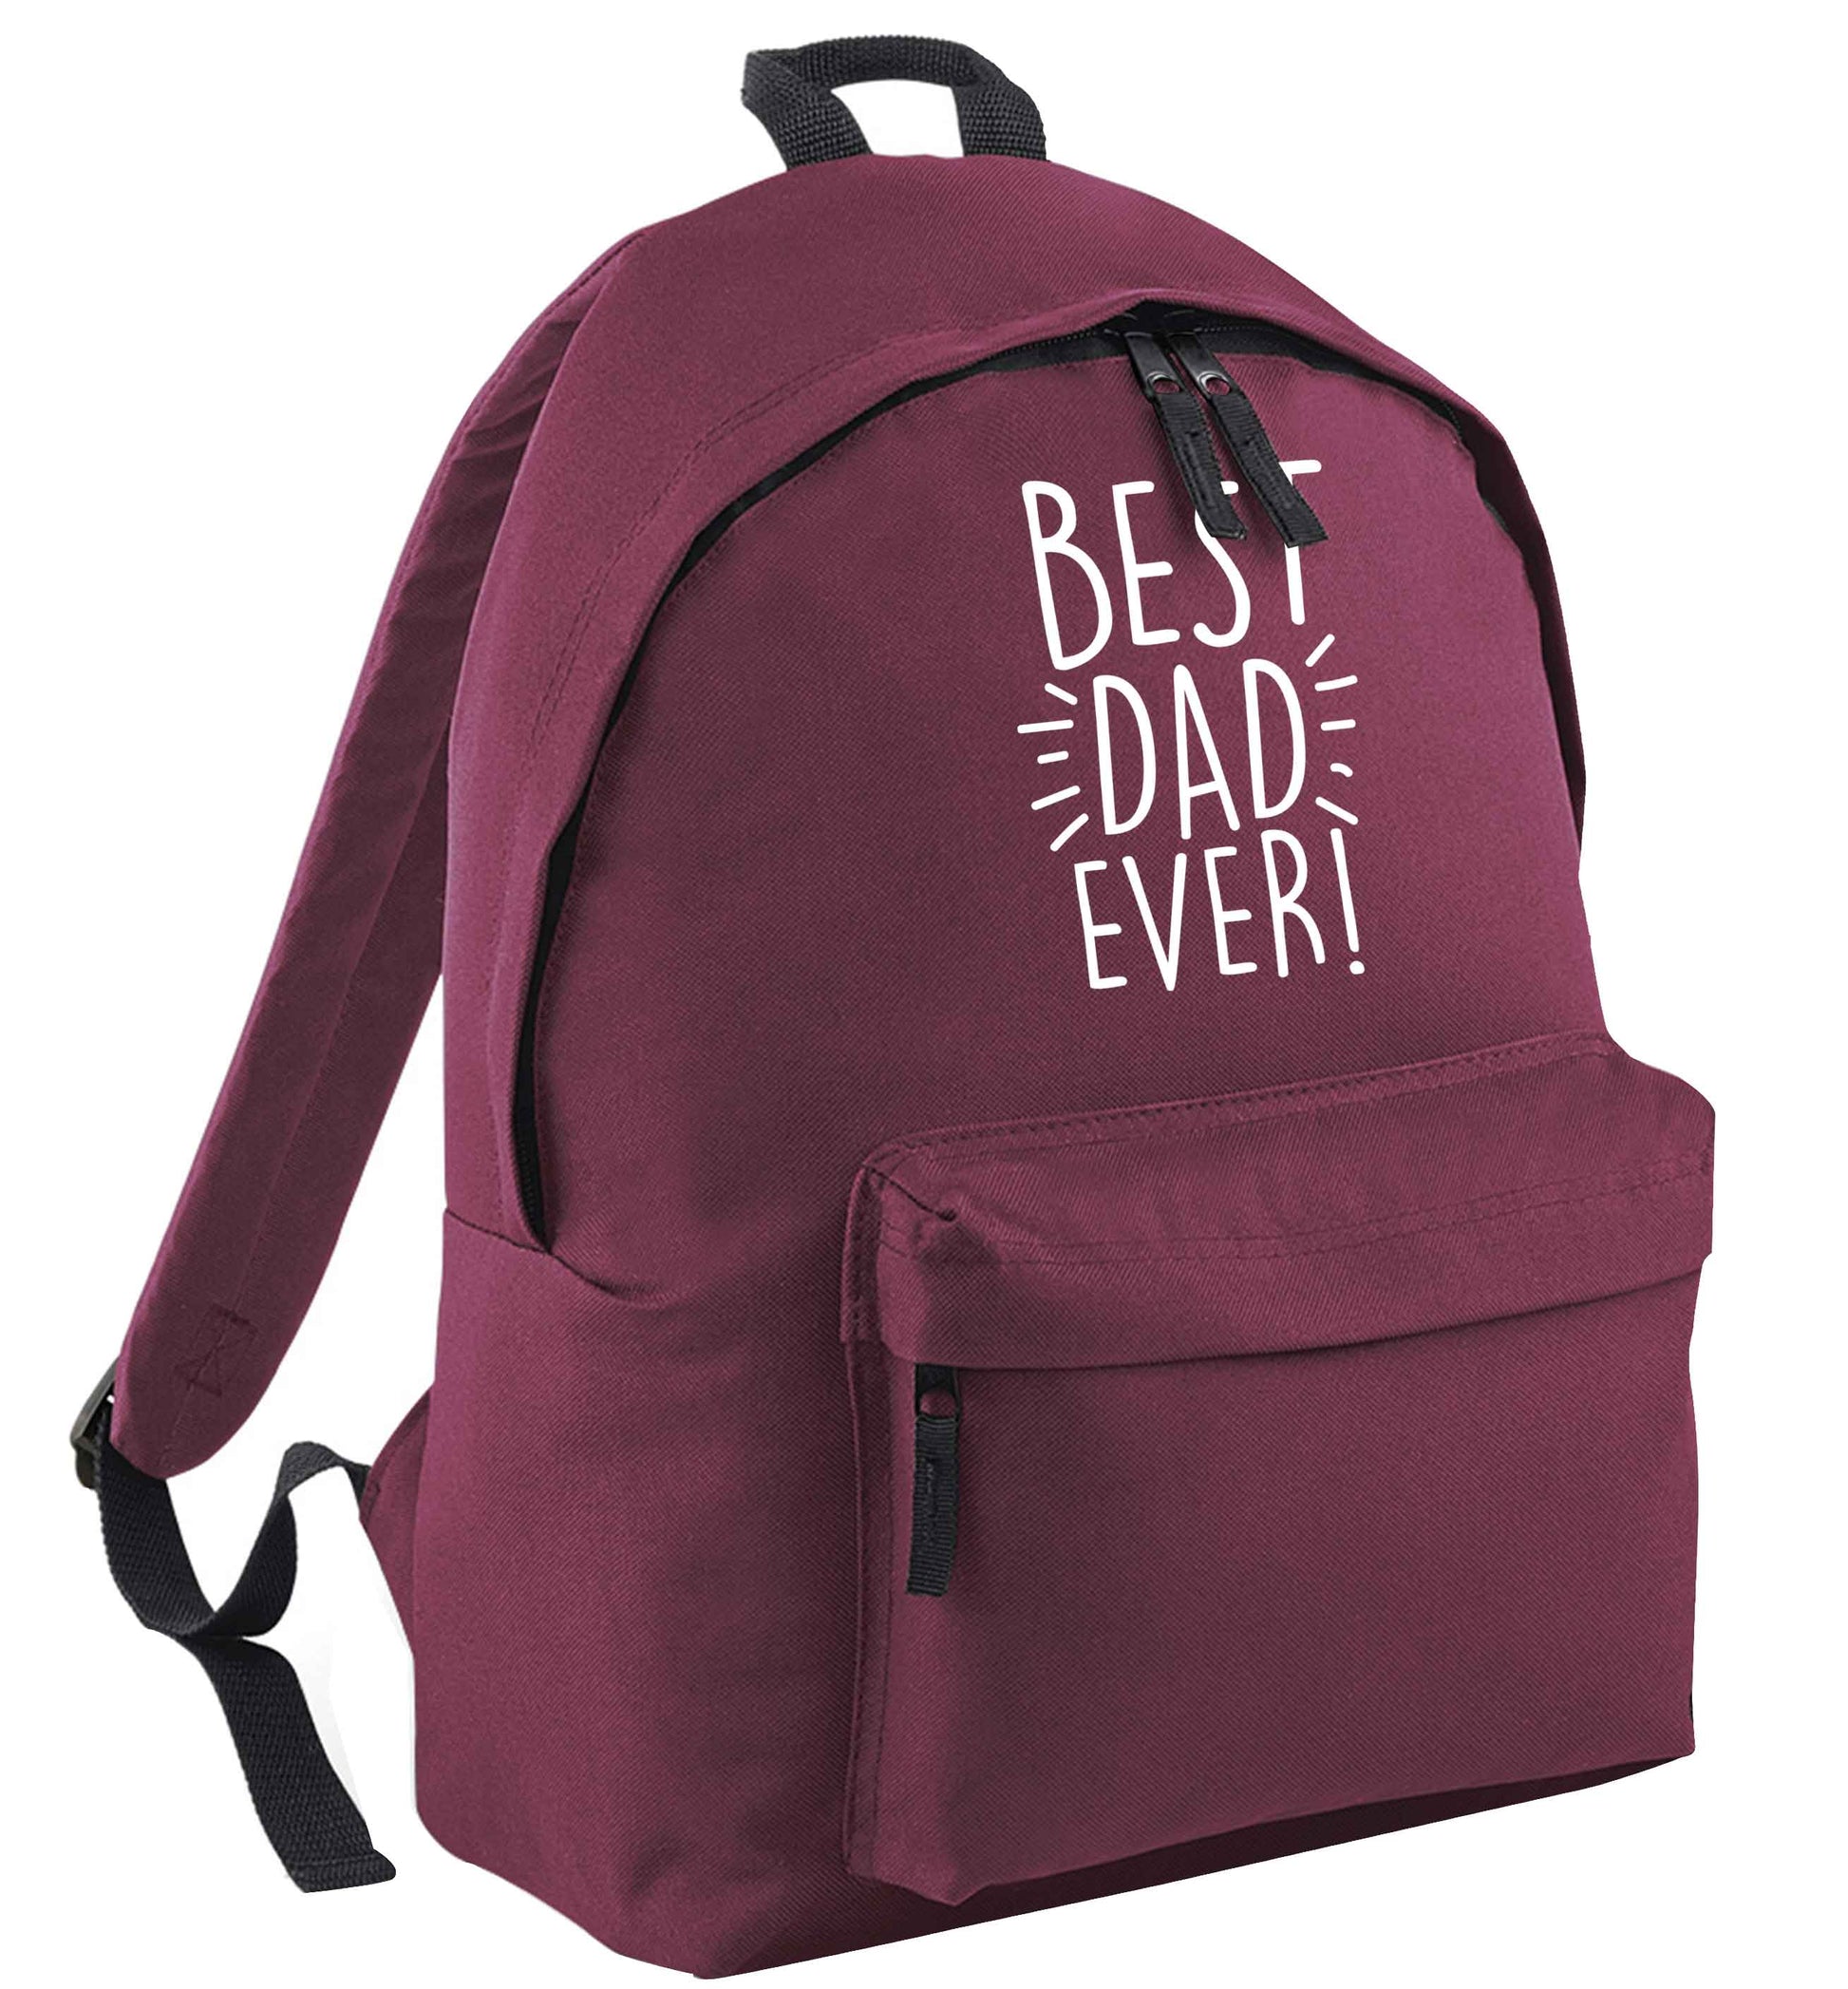 Best dad ever! maroon adults backpack